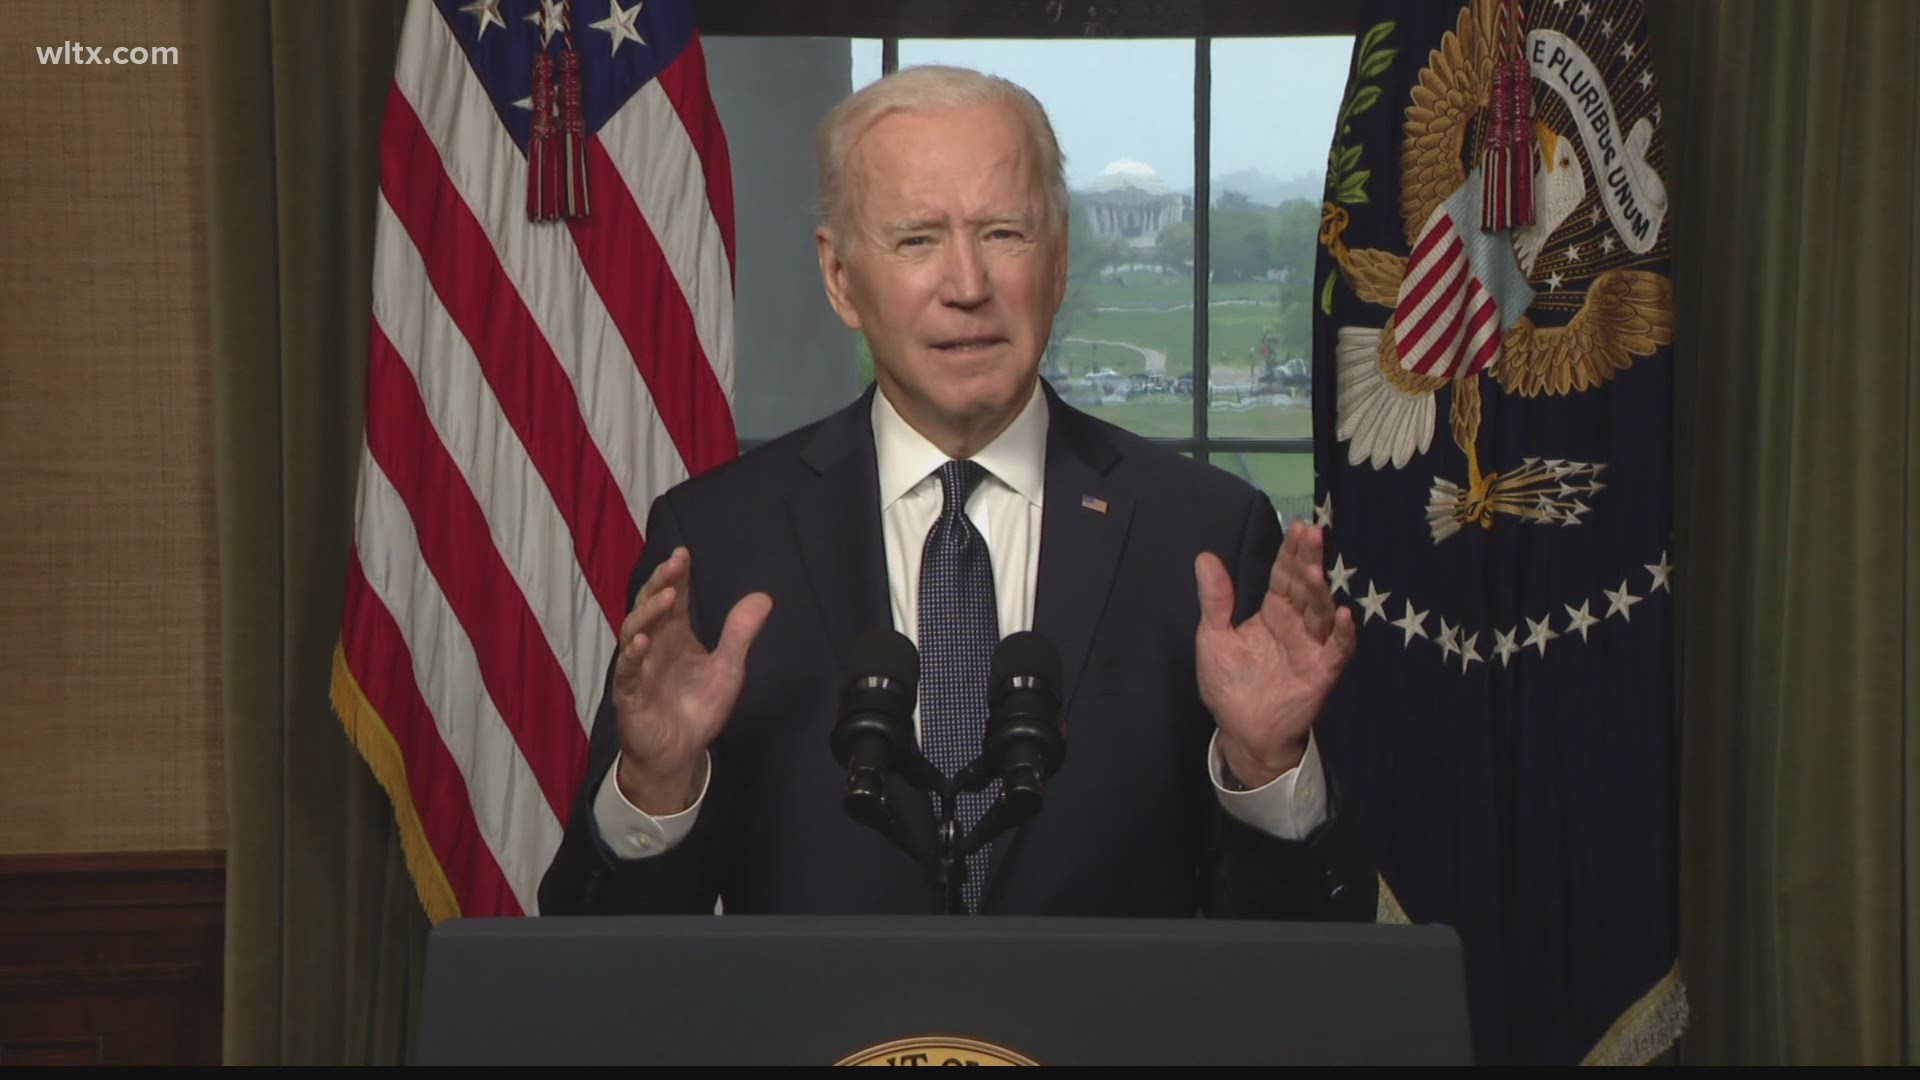 Biden said he's the 4th U.S. president to preside over an American troop presence in Afghanistan and he 'will not pass this responsibility to a fifth.'